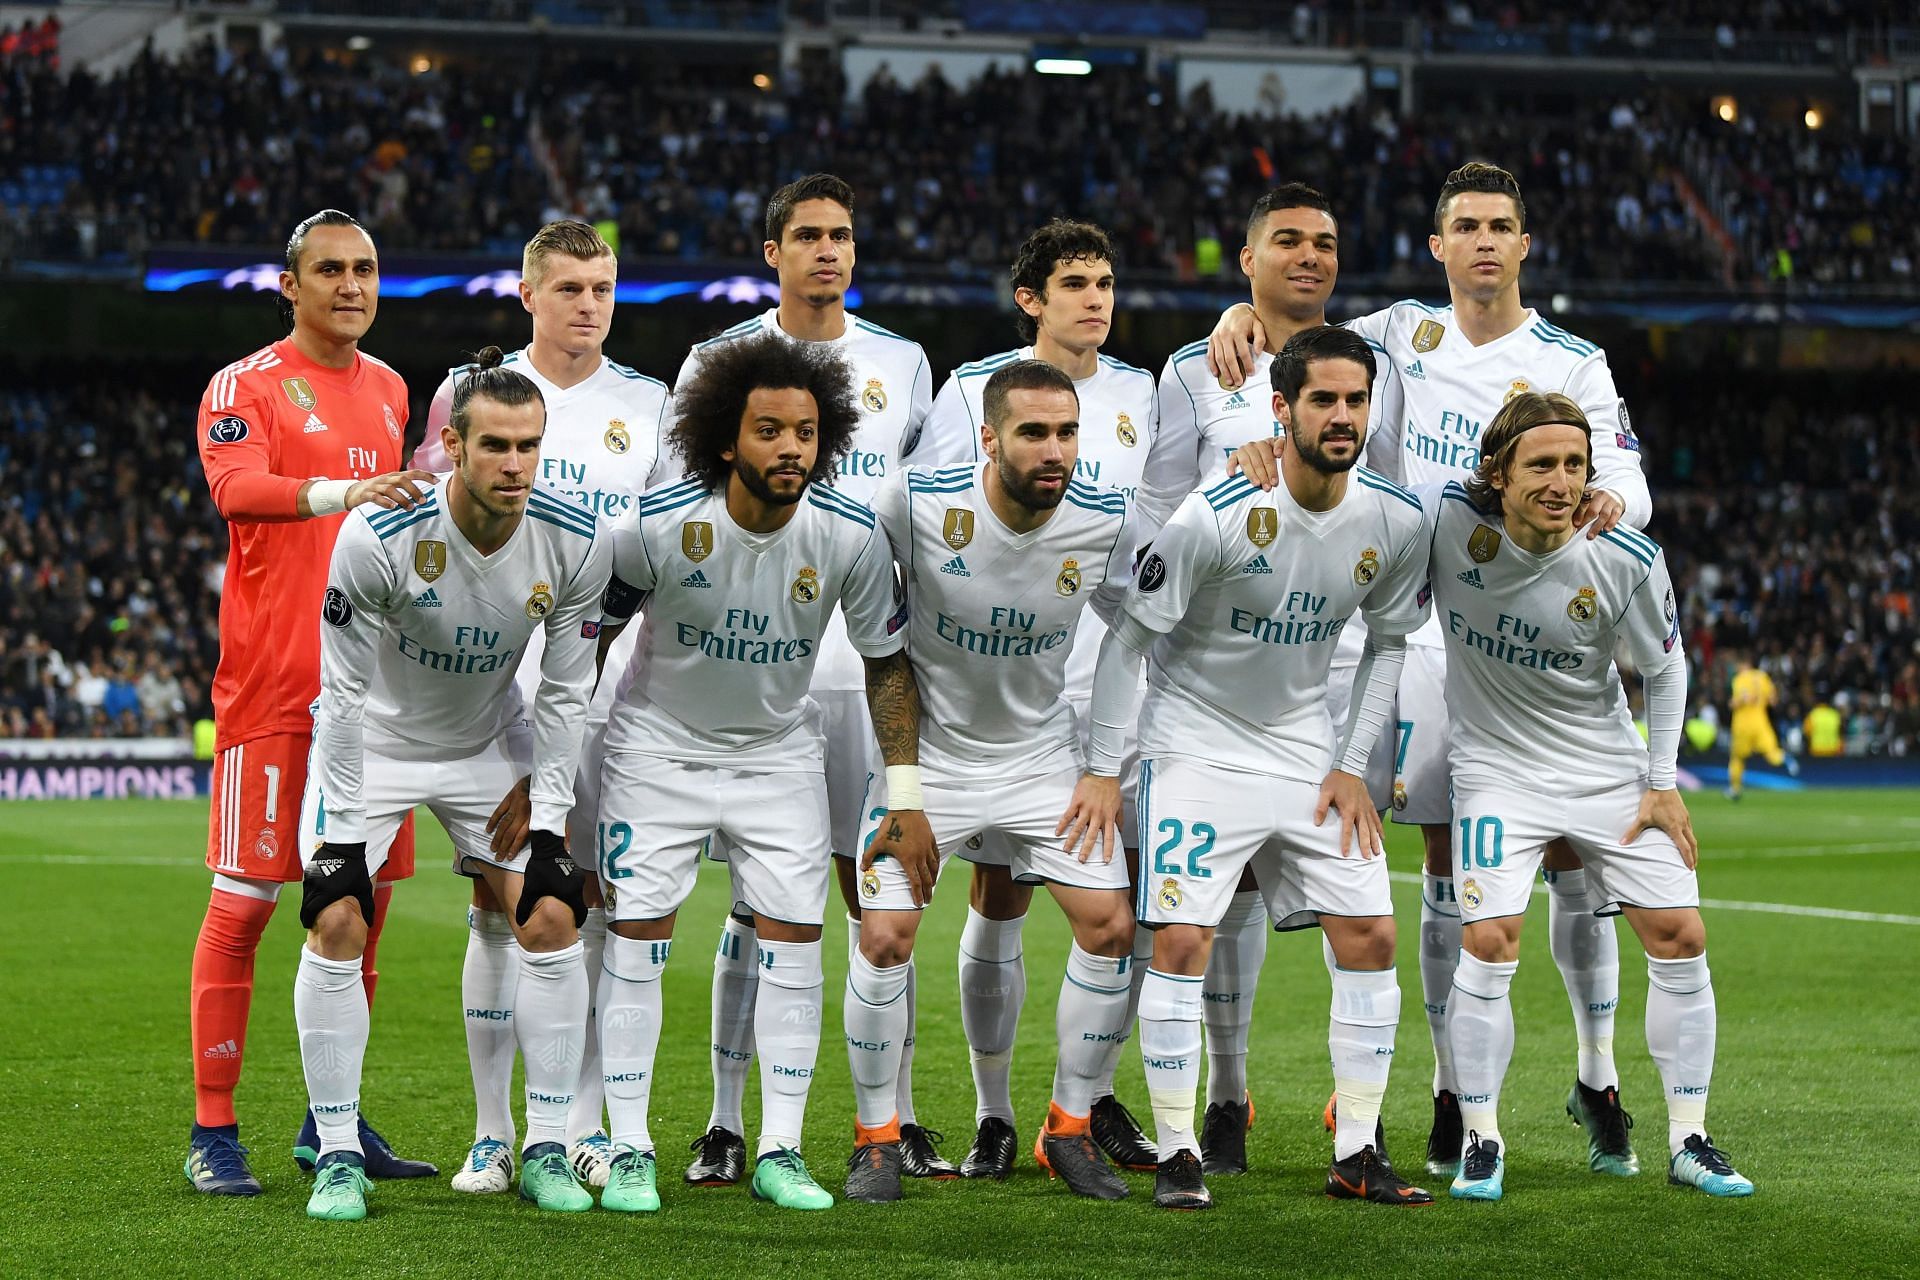 Real Madrid have bossed the Champions League on many occasions